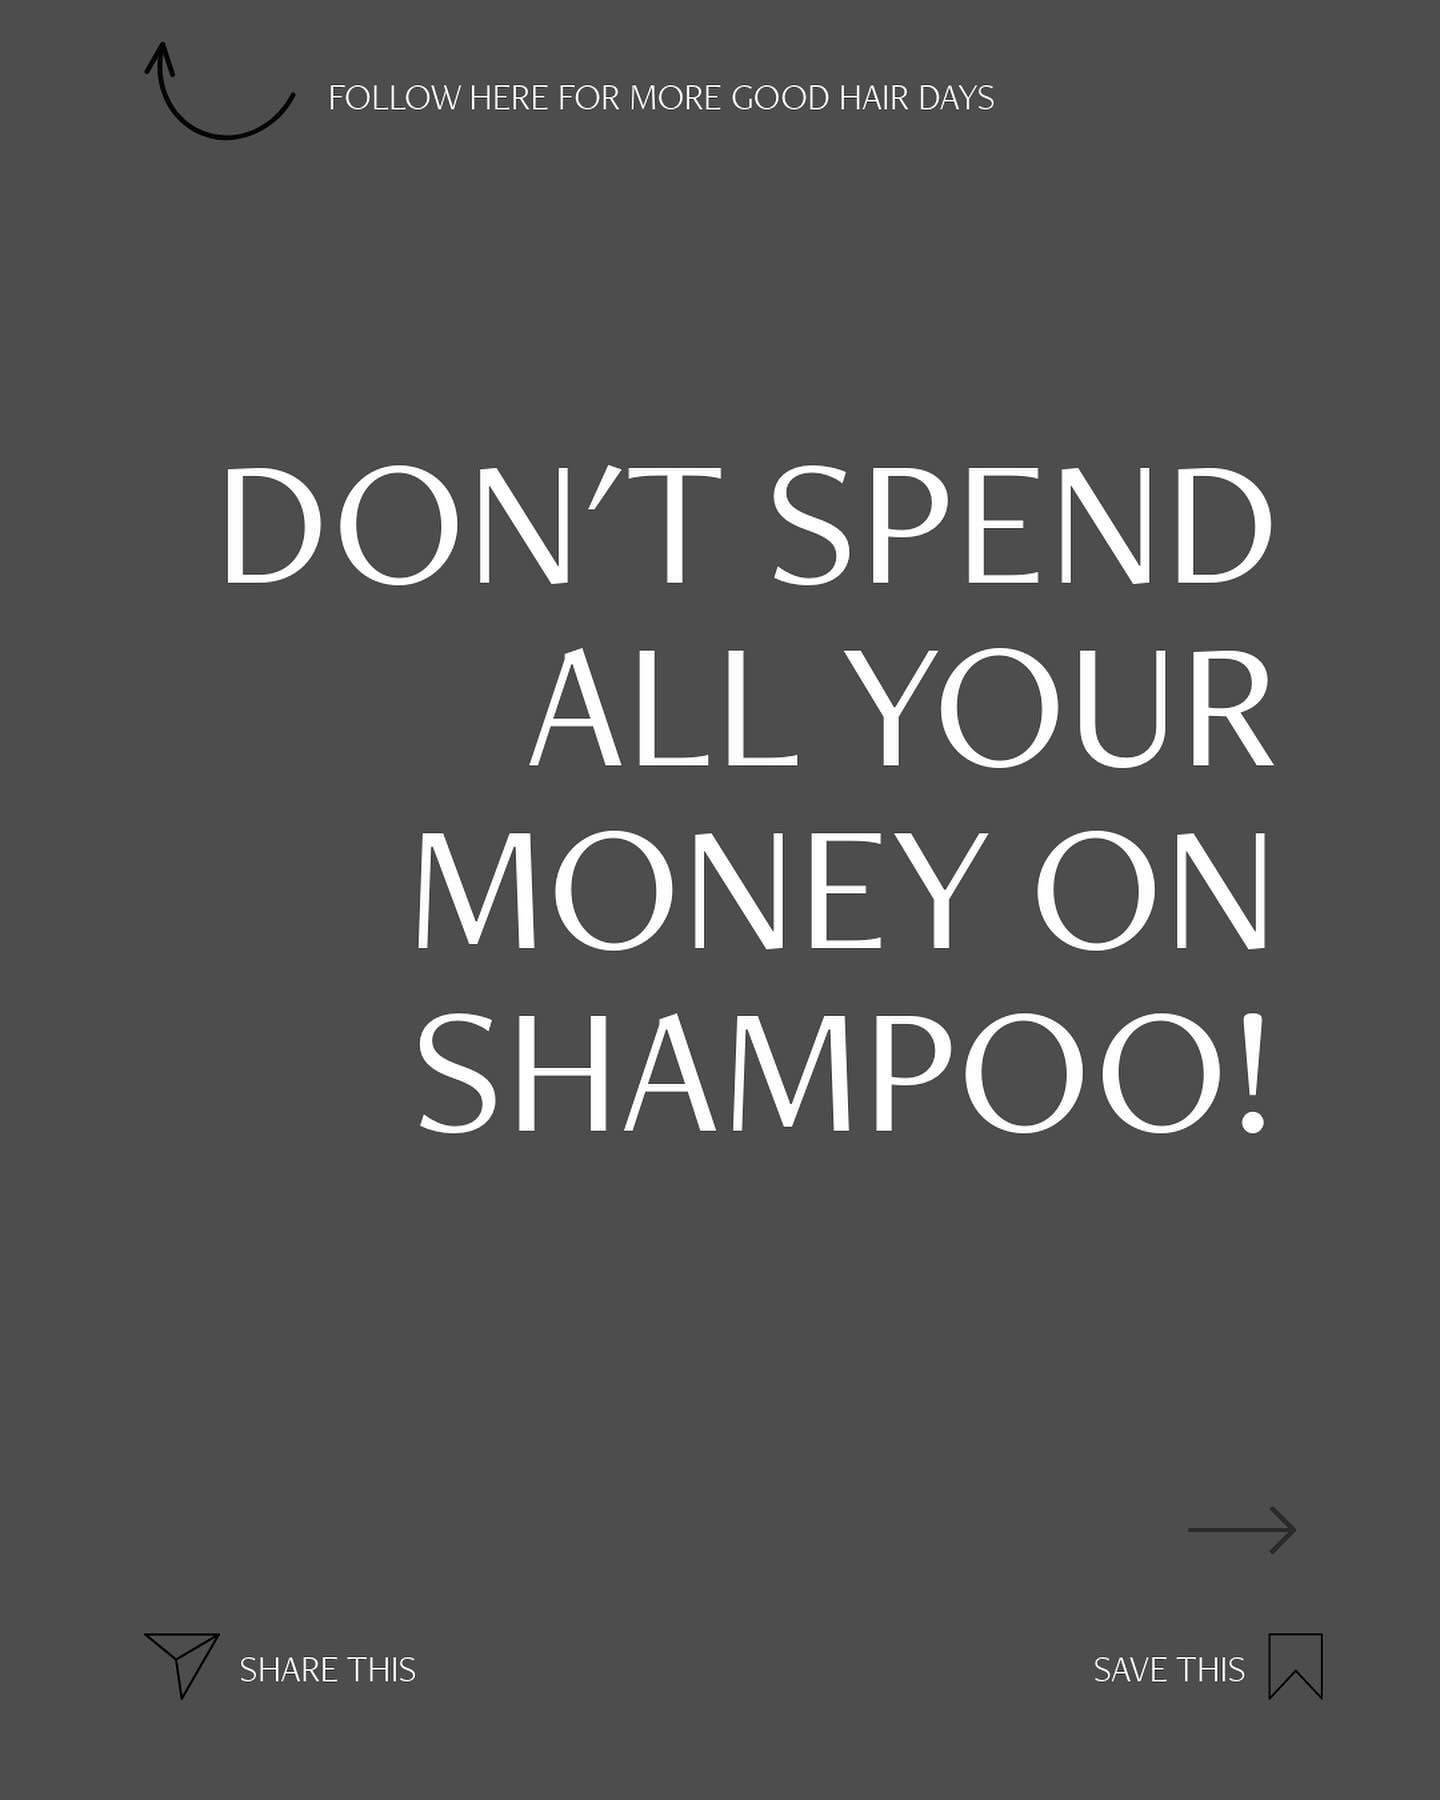 A magic shampoo doesn&rsquo;t exist - The best shampoo for you is the one that cleans your hair properly and leaves it in a manageable state for more specific care. So beware of shampoos with overinflated claims and don&rsquo;t underestimate the powe